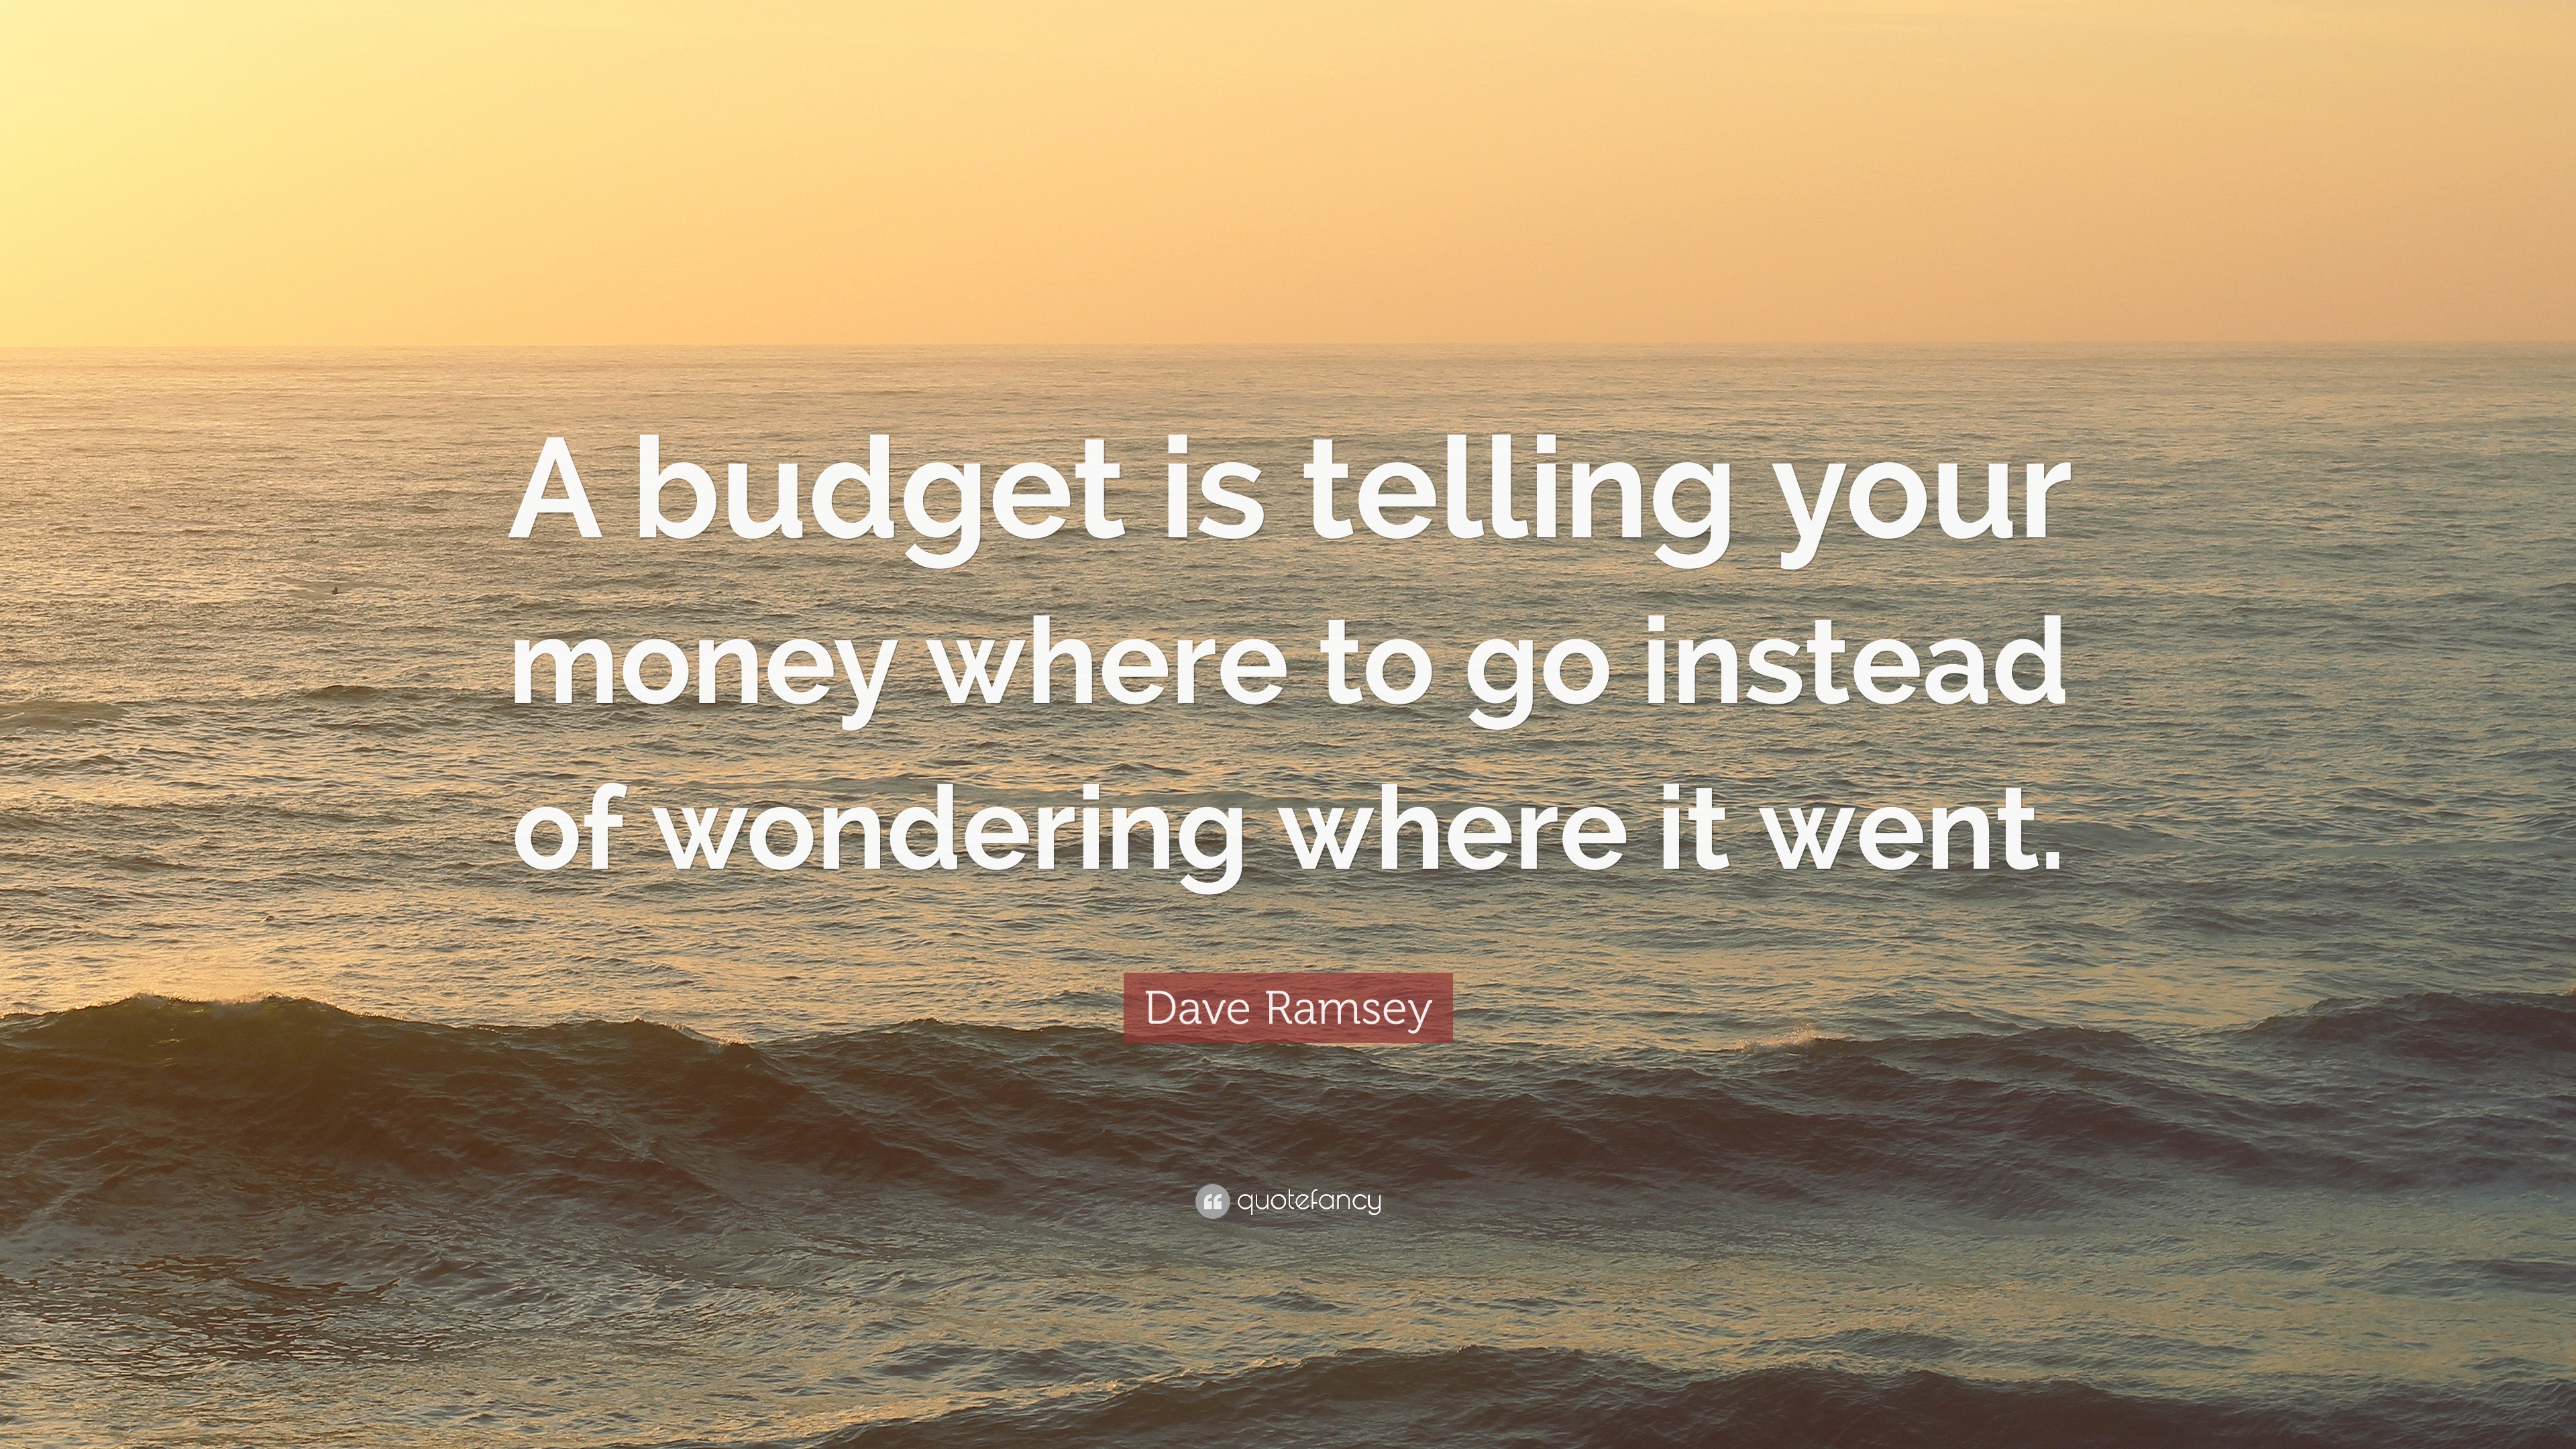 dave-ramsey-quote-a-budget-is-telling-your-money-where-to-go-instead